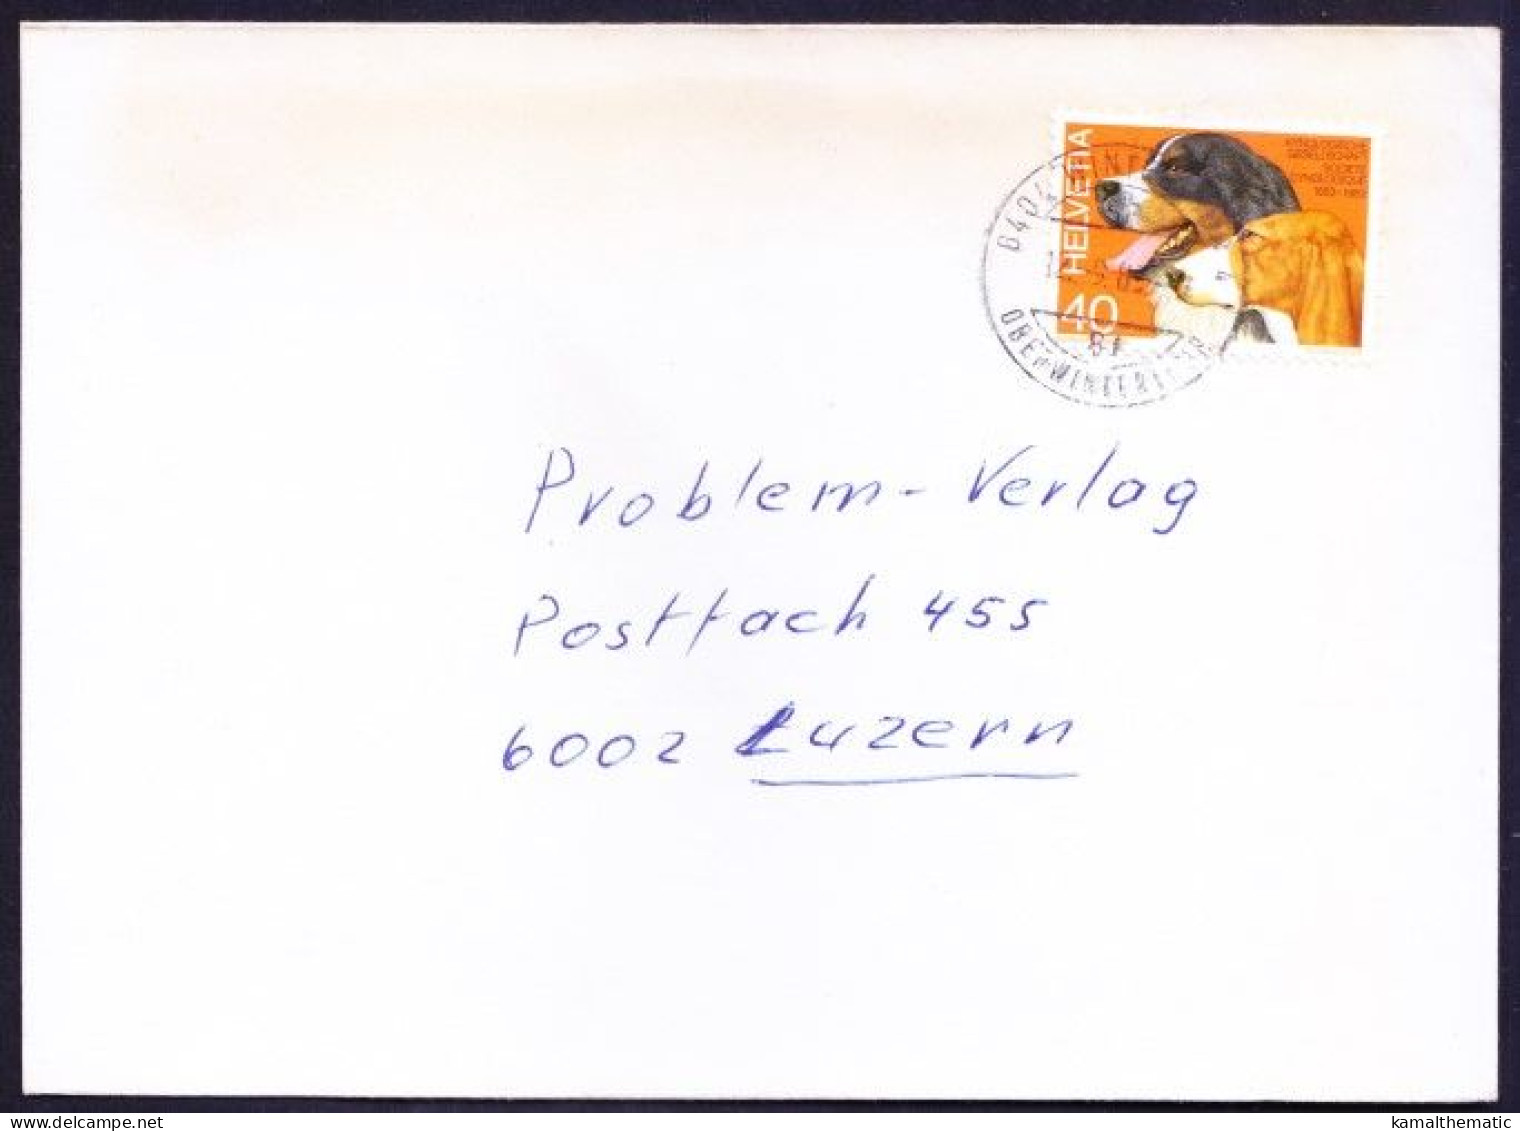 Switzerland 1983 Used Cover With Dogs, Swiss Cynology Society Stamp - Dogs